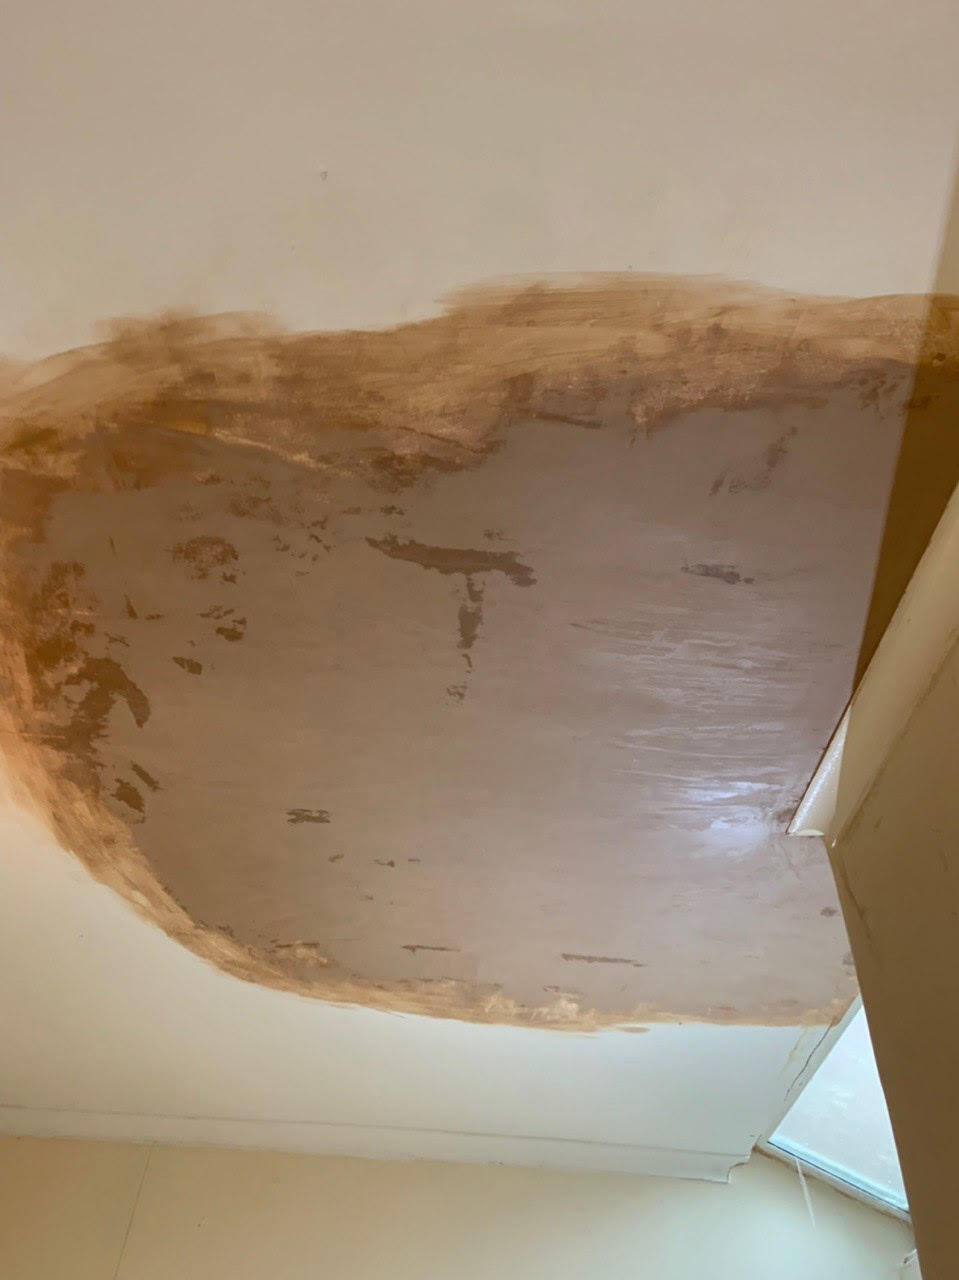 Water damaged ceiling due to a leak 3